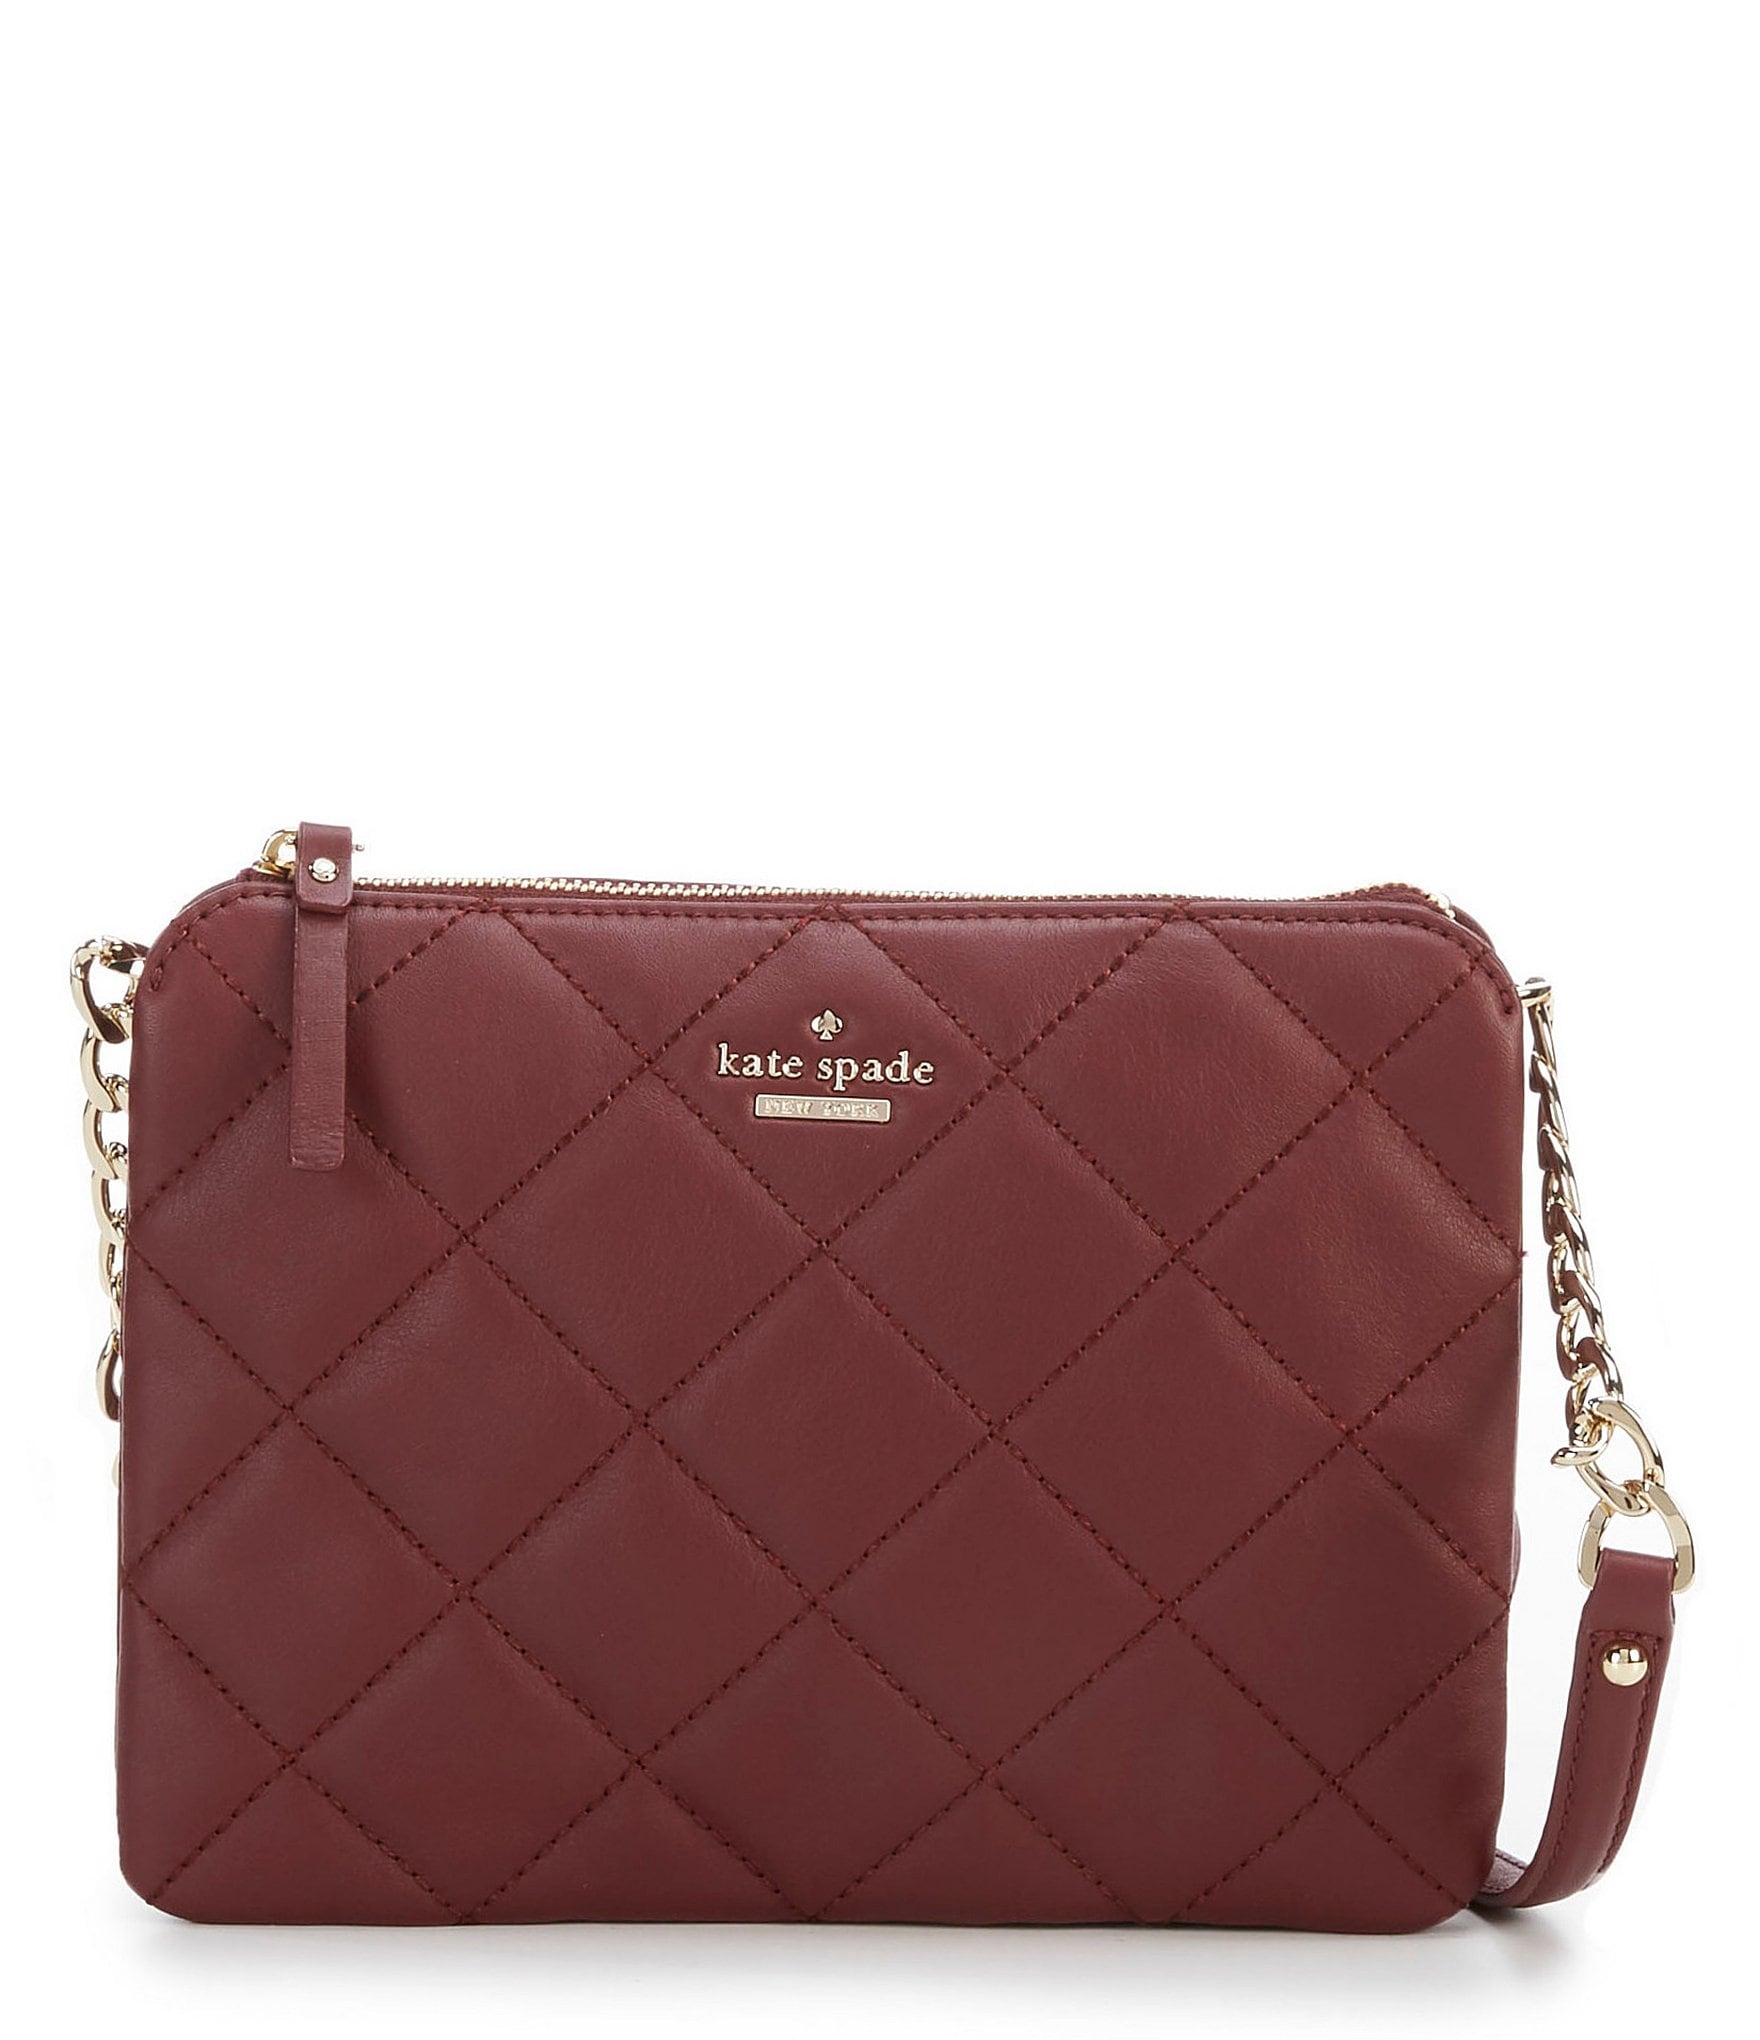 kate spade new york Emerson Place Harbor Quilted Cross-Body Bag | Dillards